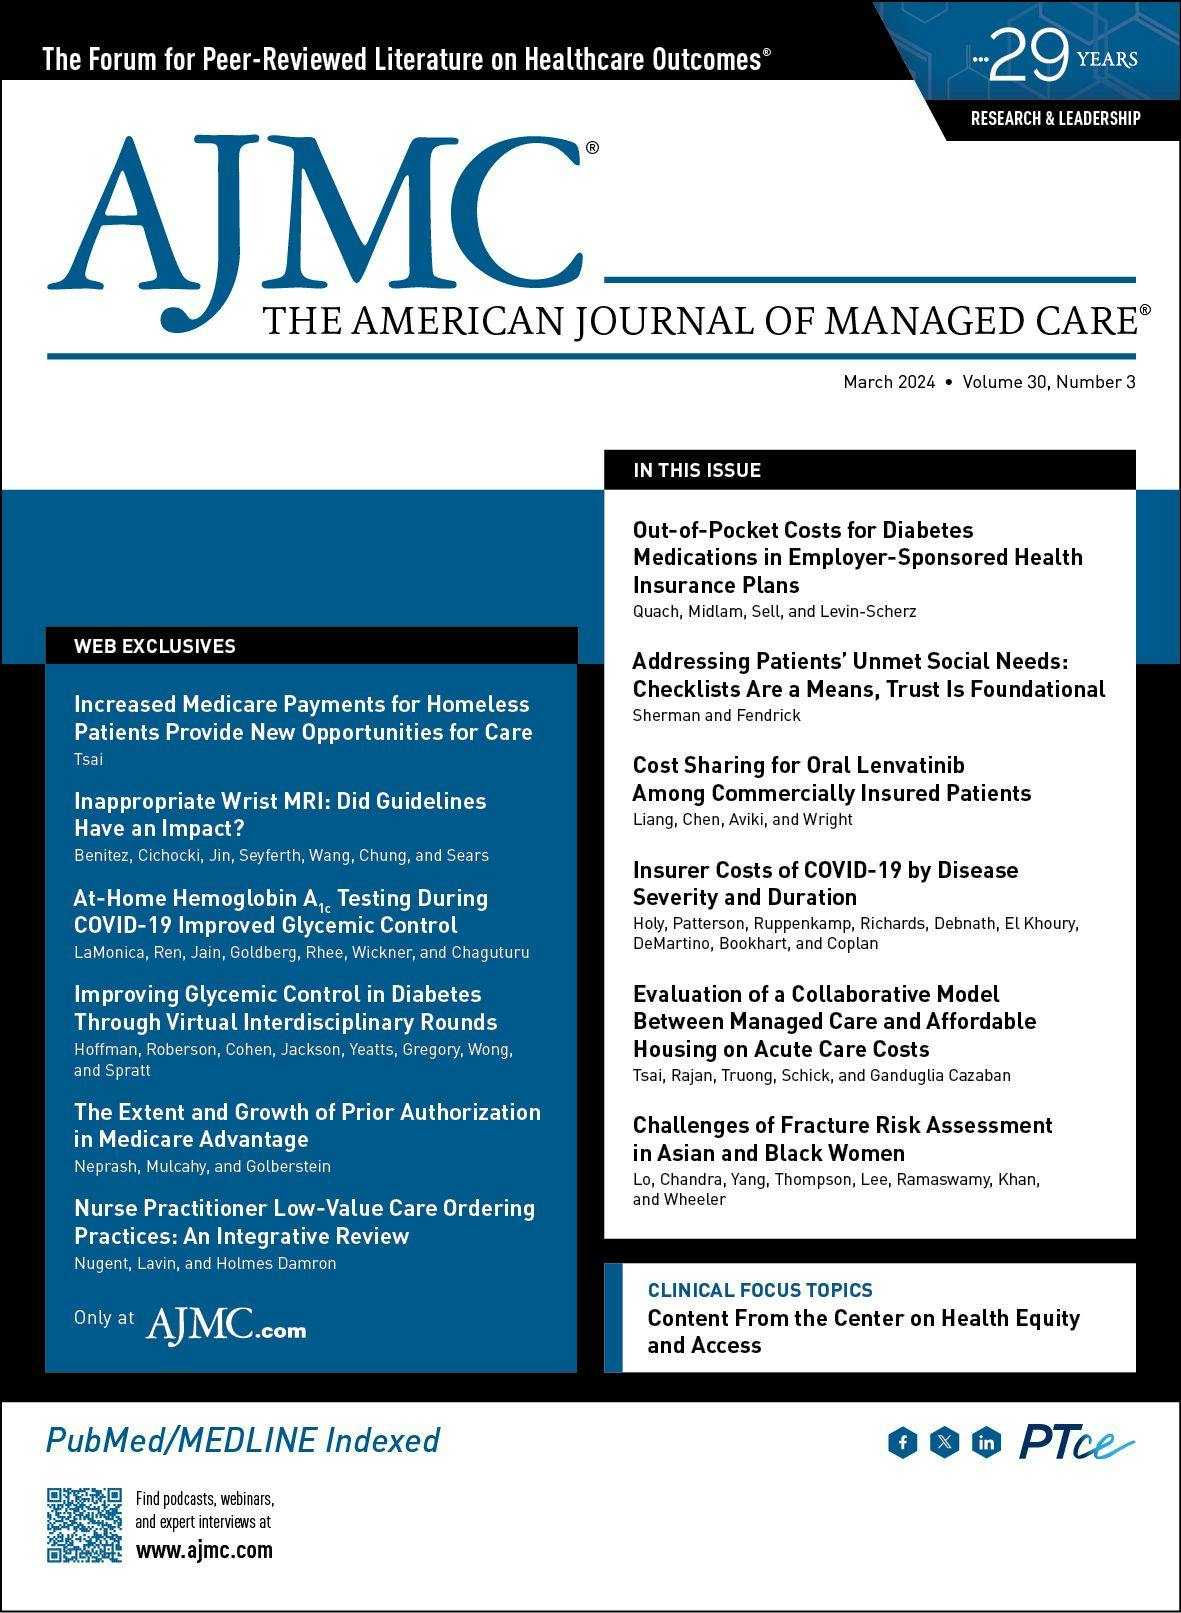 The American Journal of Managed Care March 2024 Issue